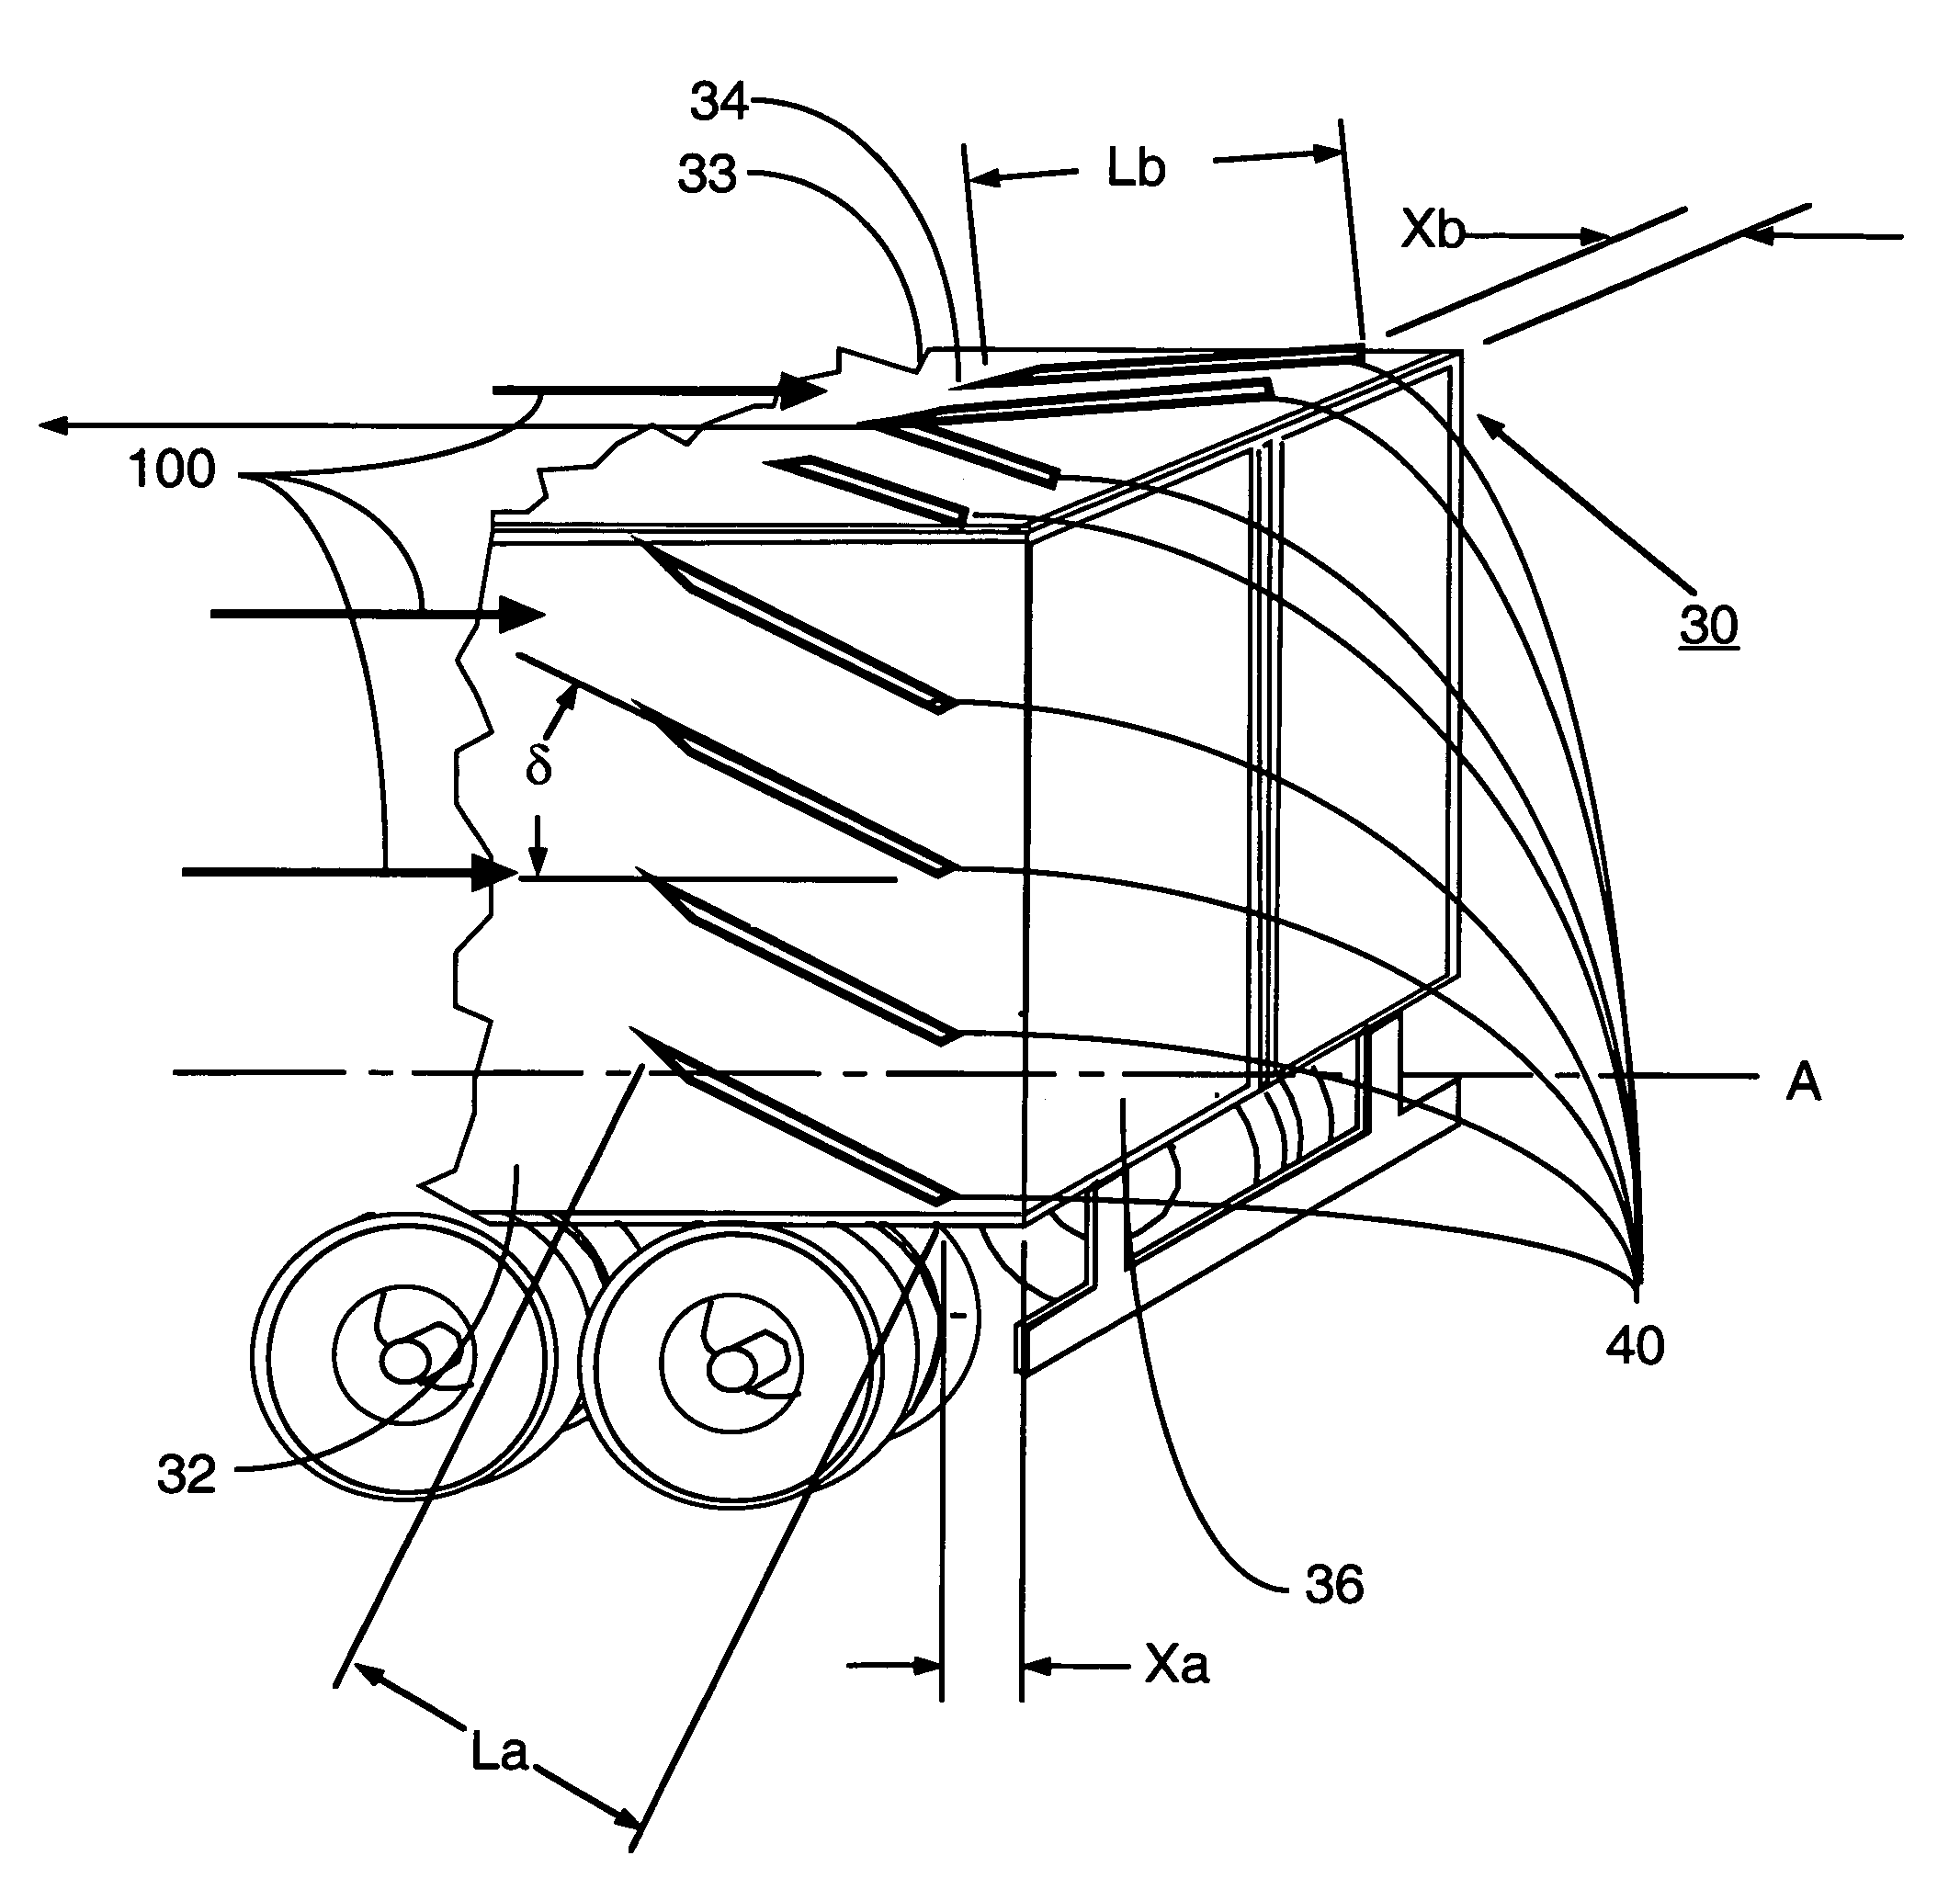 Vortex strake device and method for reducing the aerodynamic drag of ground vehicles